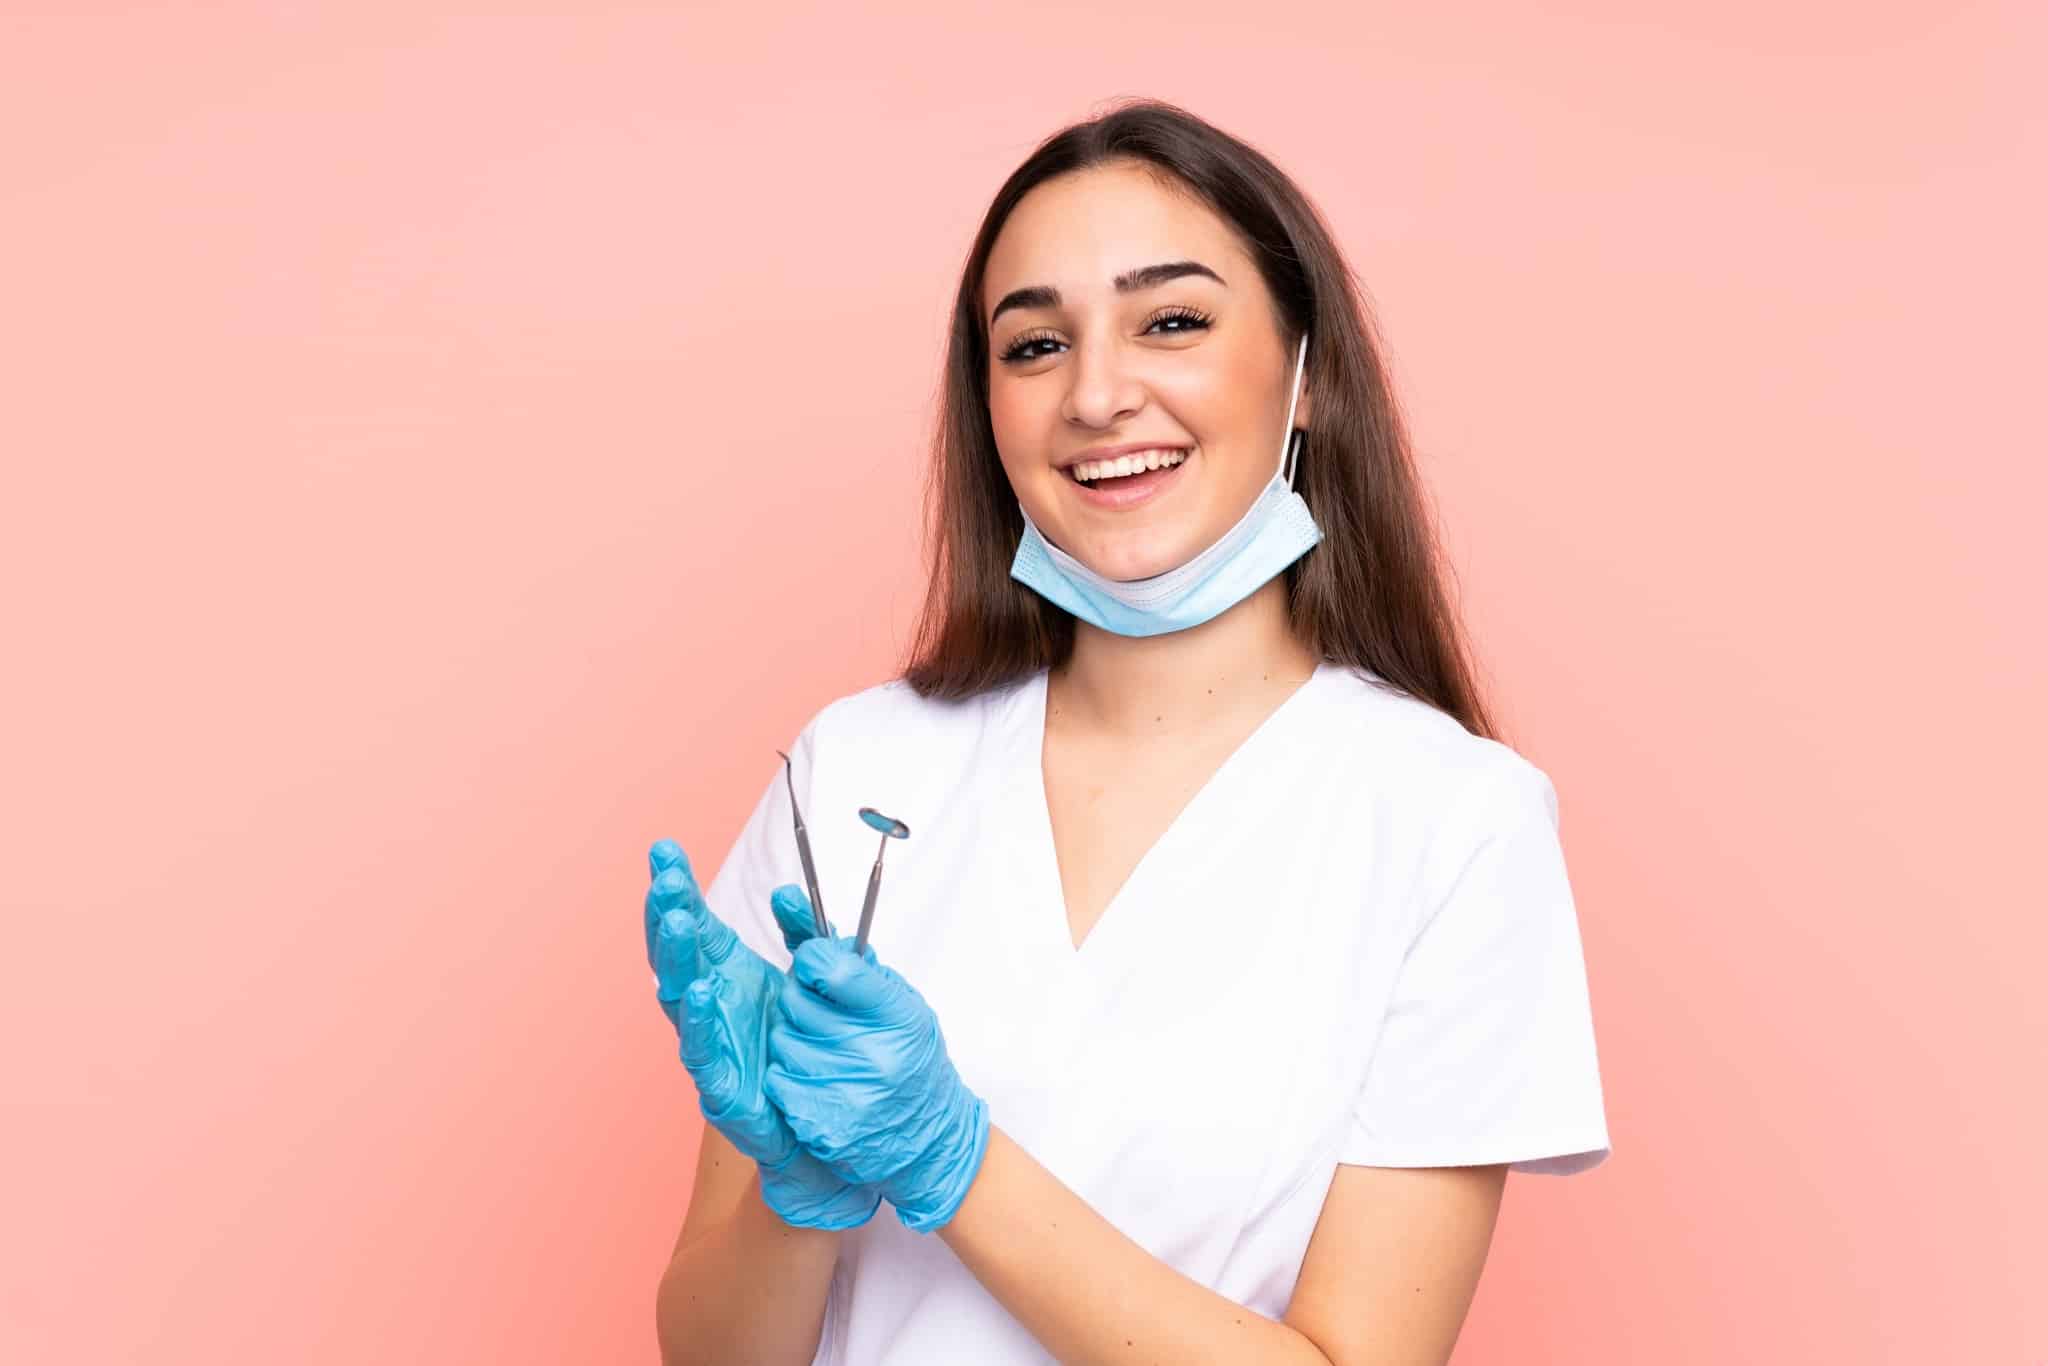 Smiling dental professional holding tools